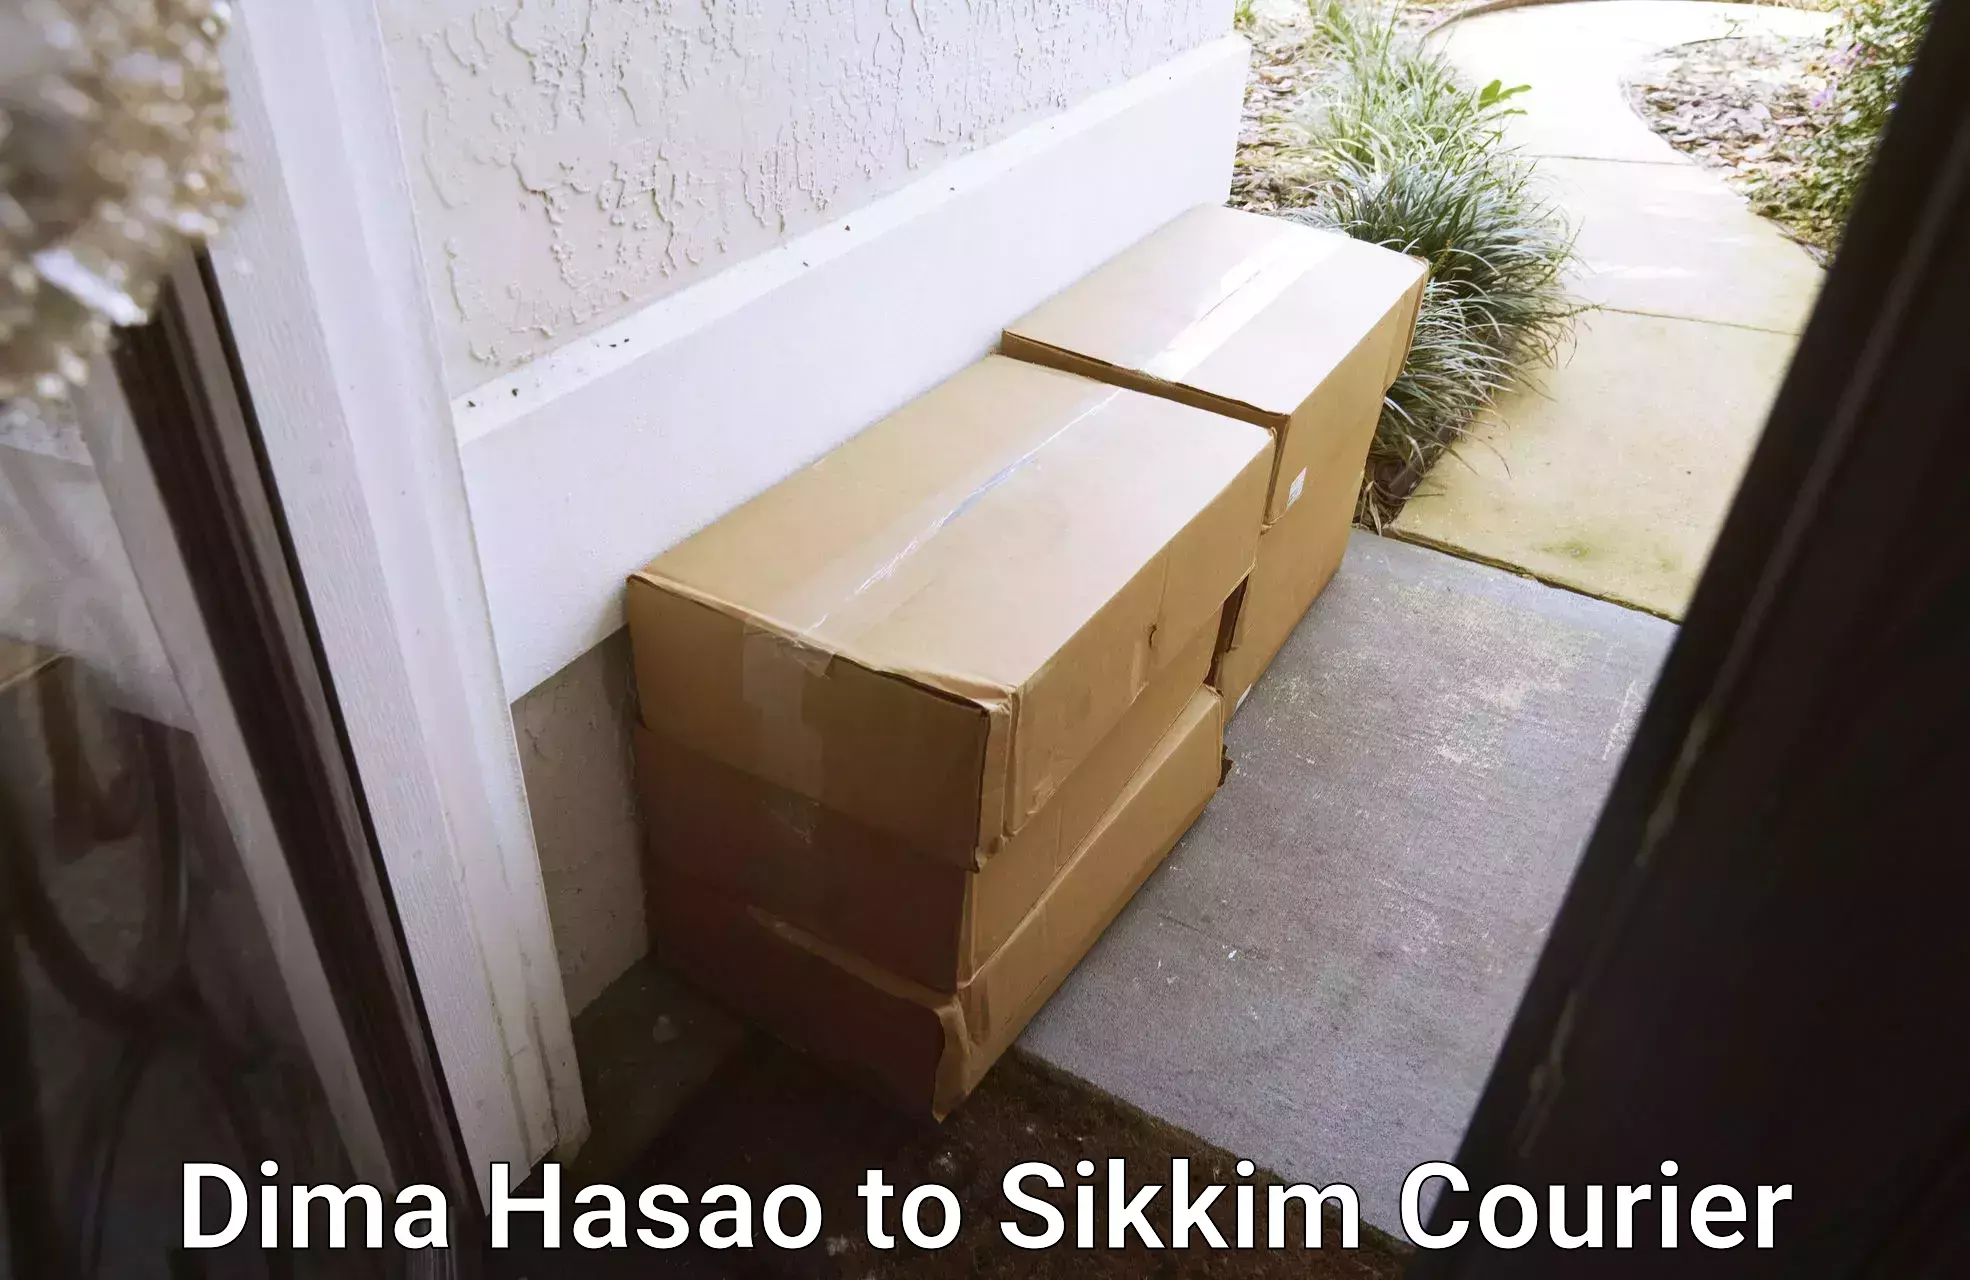 Customized shipping options Dima Hasao to West Sikkim